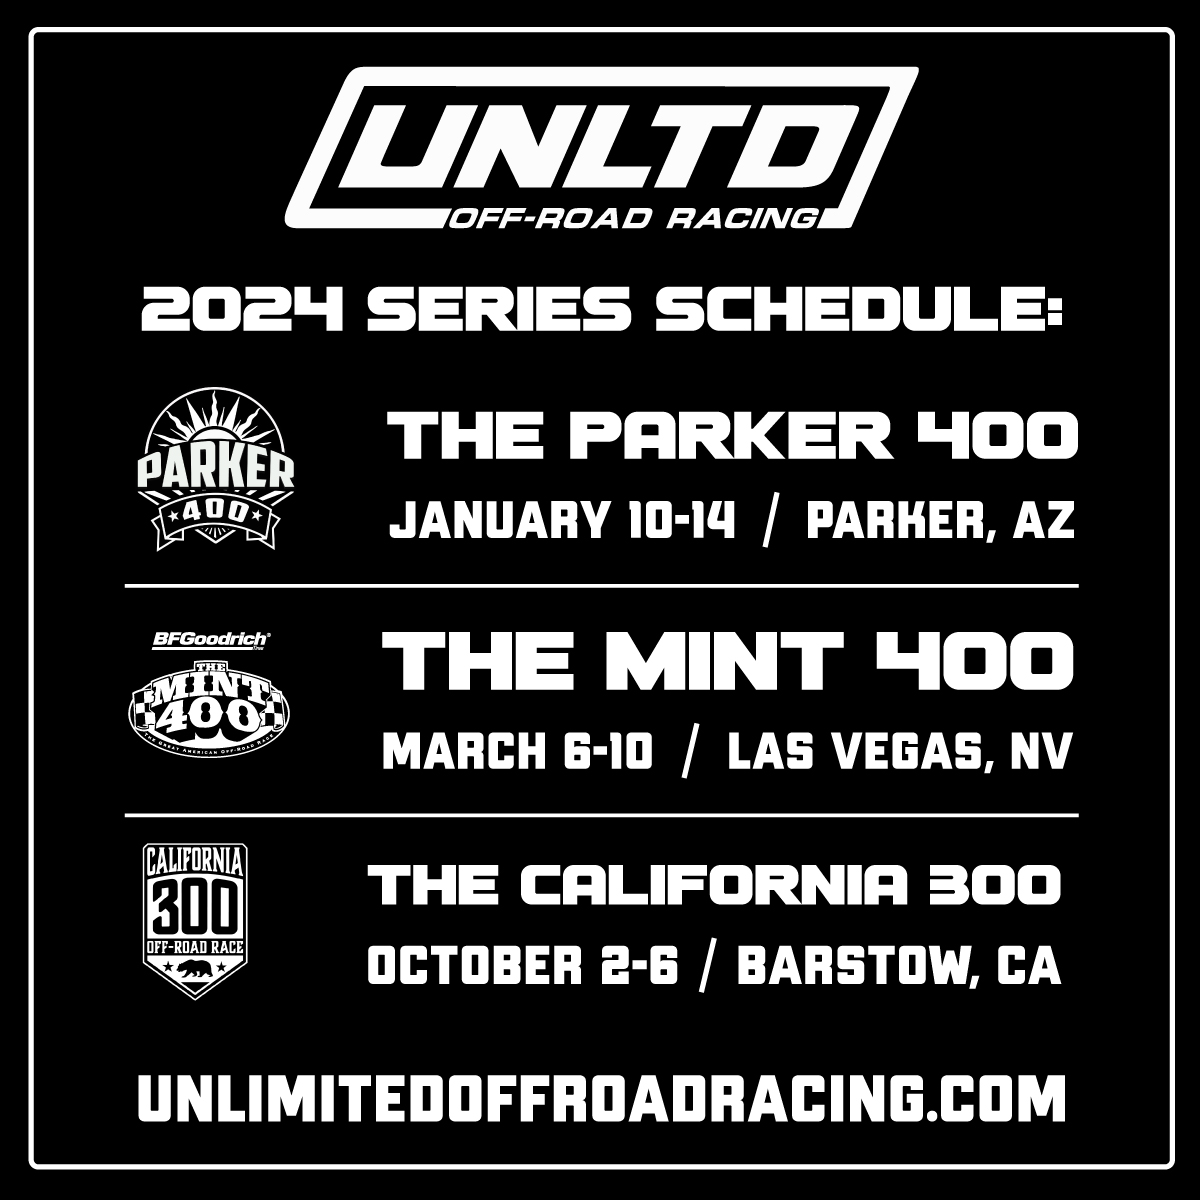 The 2024 Unlimited OffRoad Racing Series Schedule The California 300